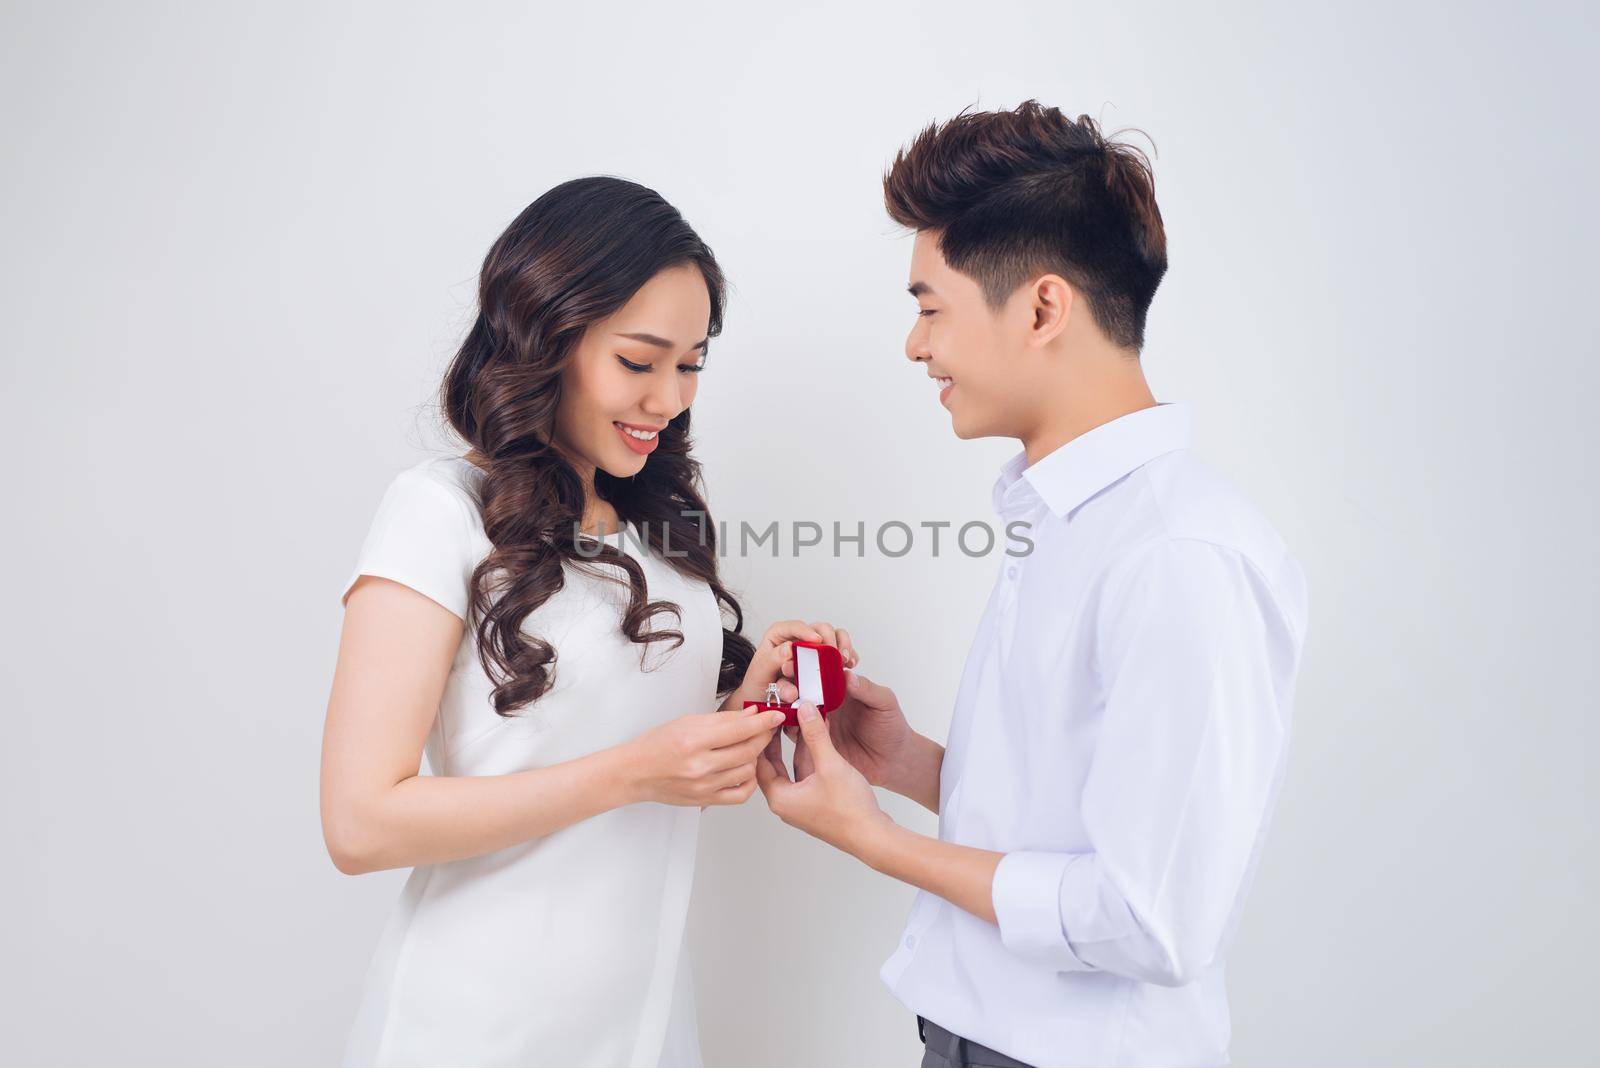 Proposal. Handsome man showing engagement diamond ring to his girlfriend. Proposed wedding.